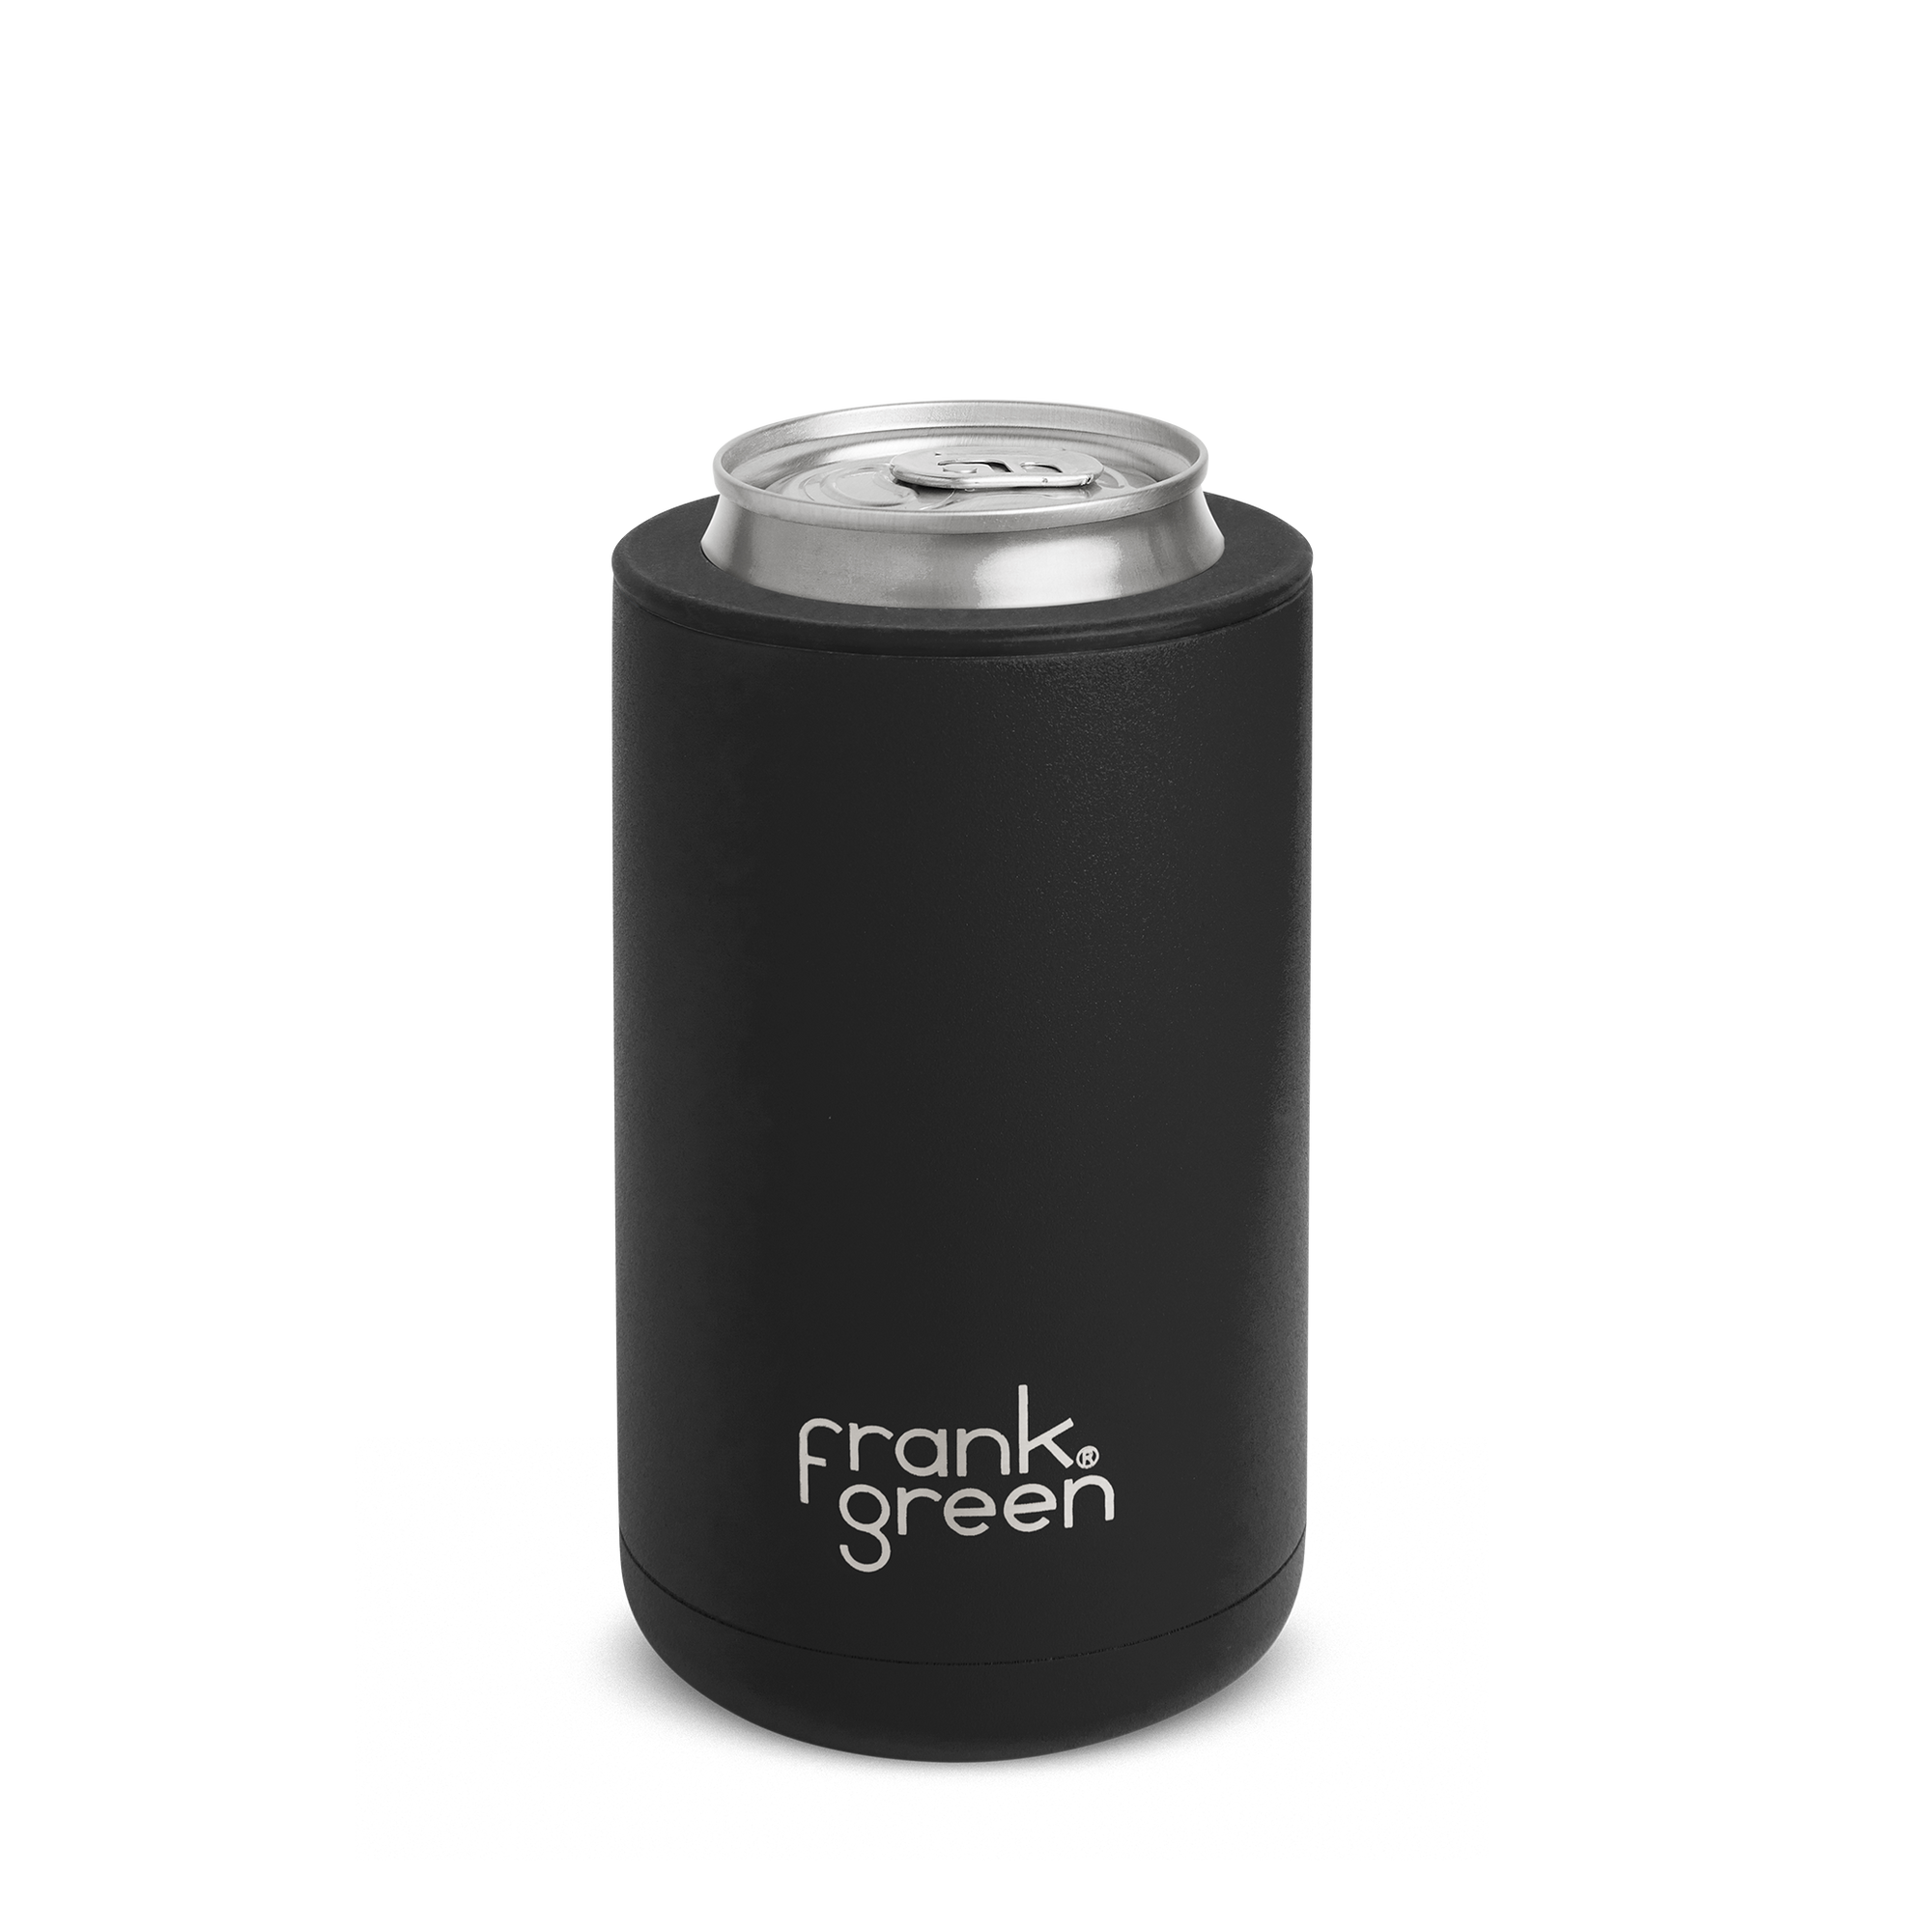 Reduce Can Cooler - 4-in-1 Stainless Steel Can Holder and Beer Bottle Holder